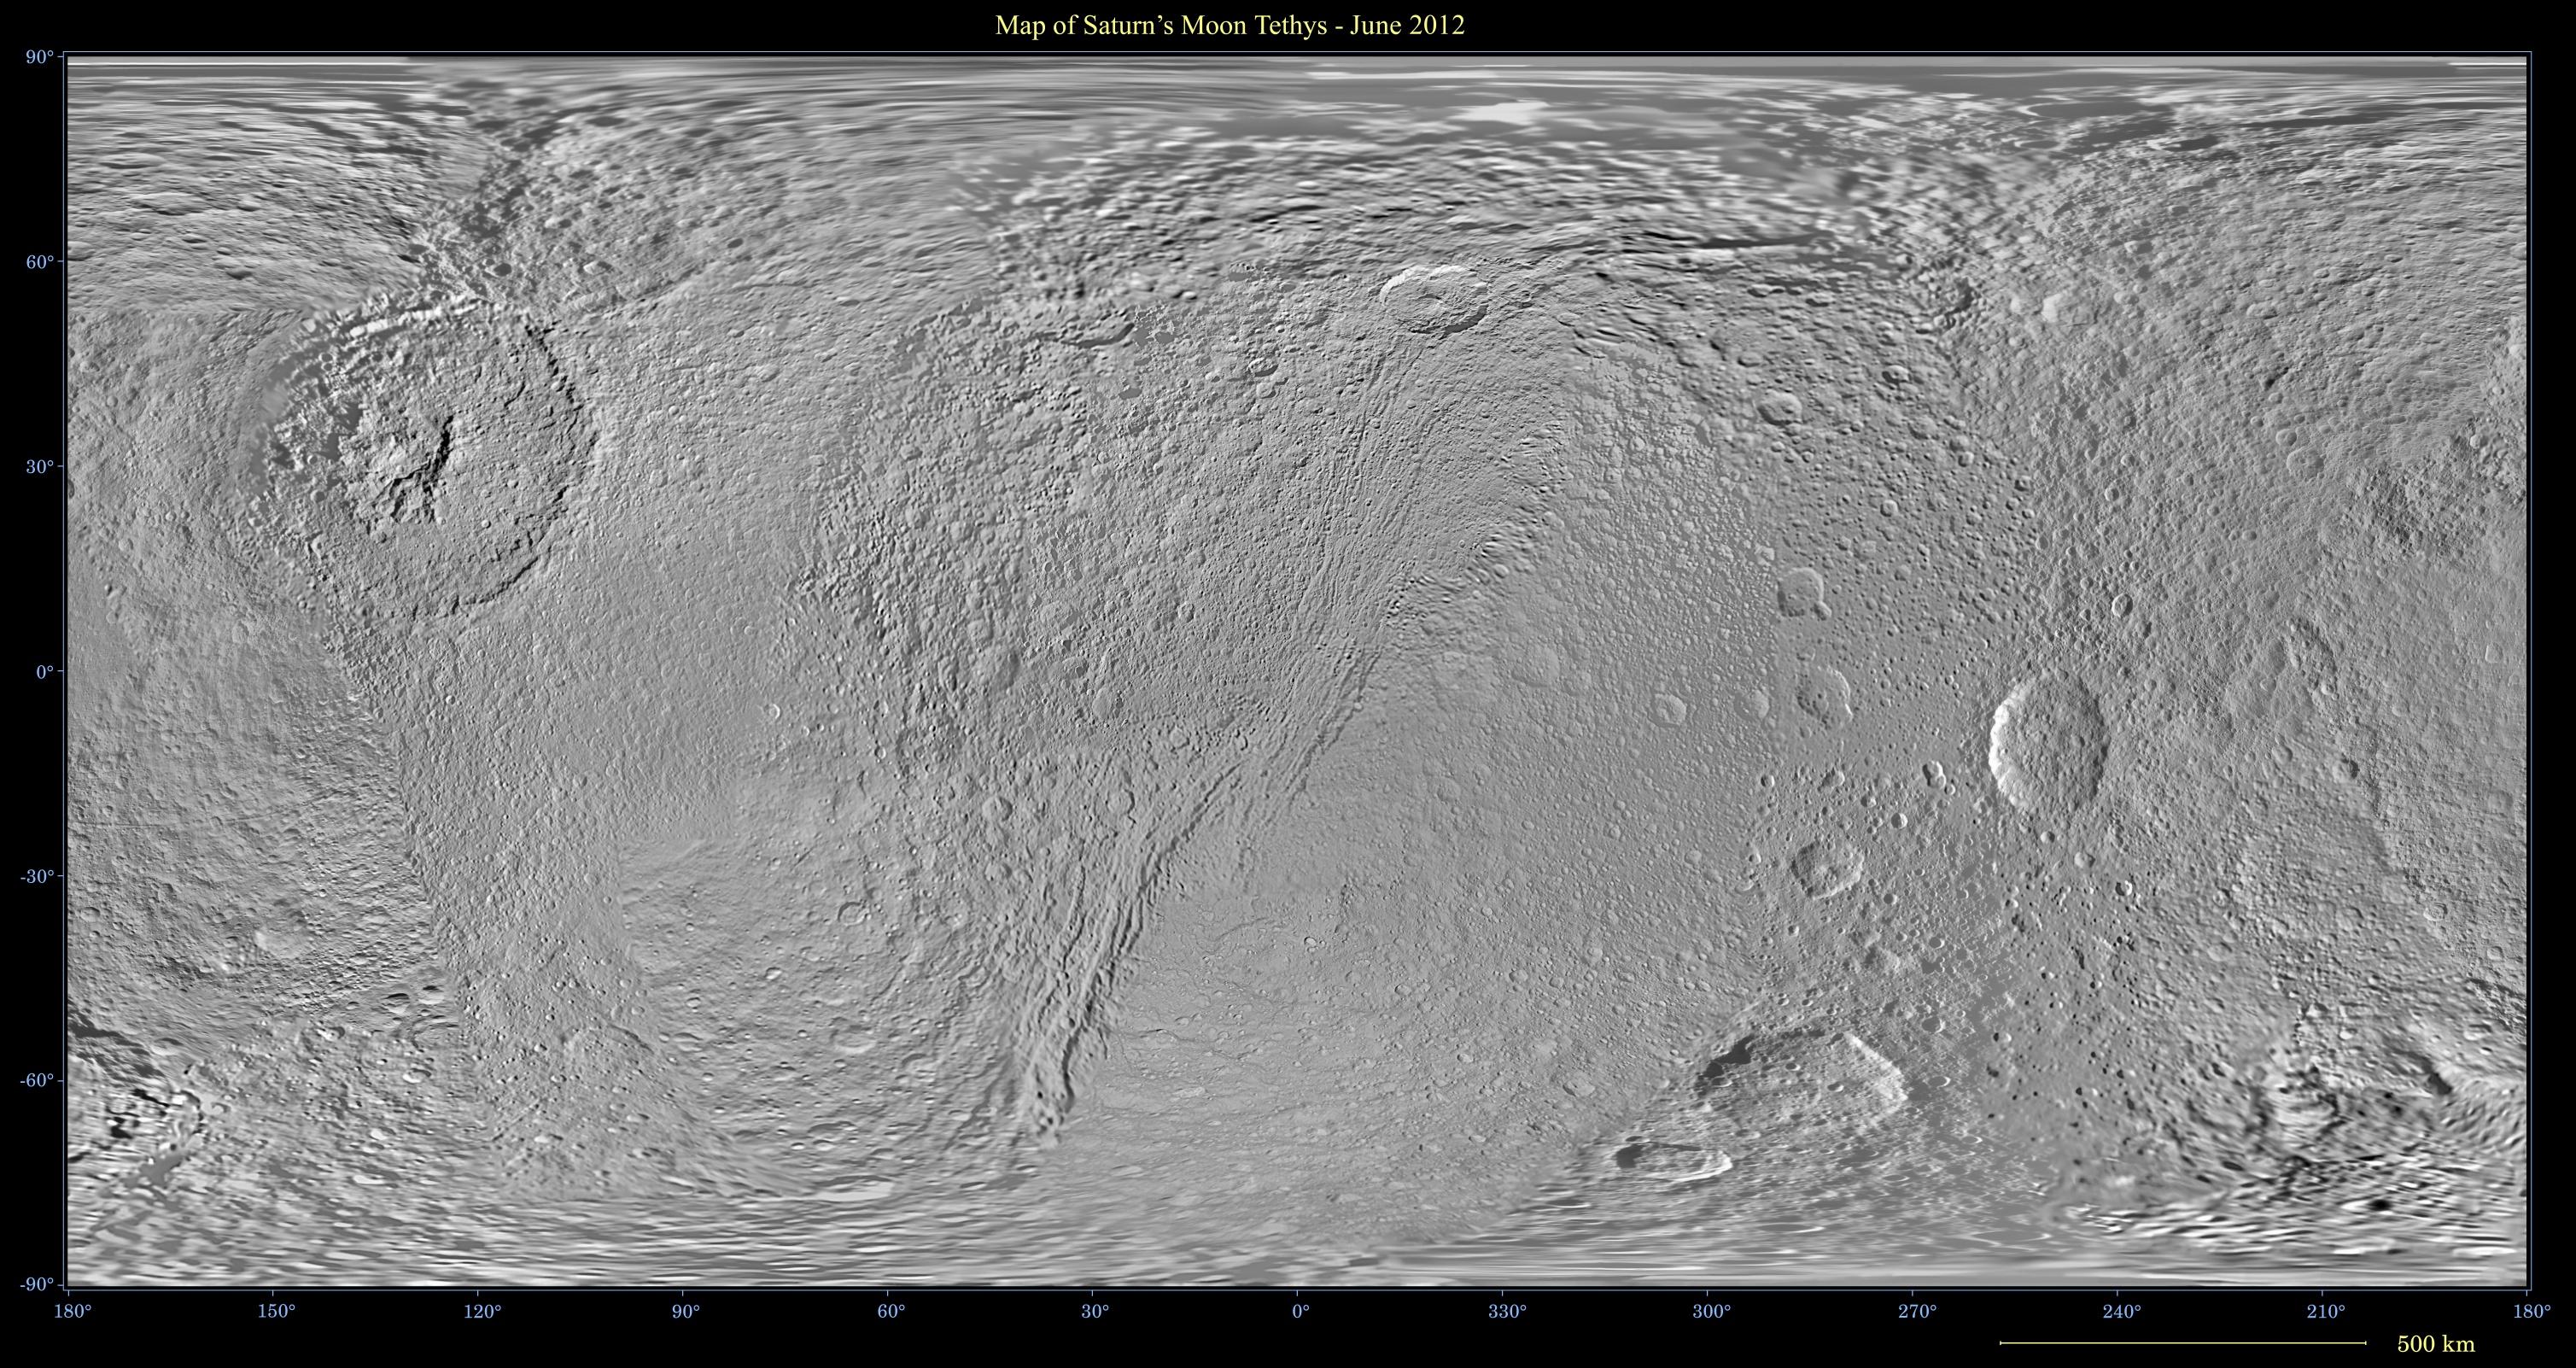 This global map of Saturn's moon Tethys was created using images taken during Cassini spacecraft flybys.